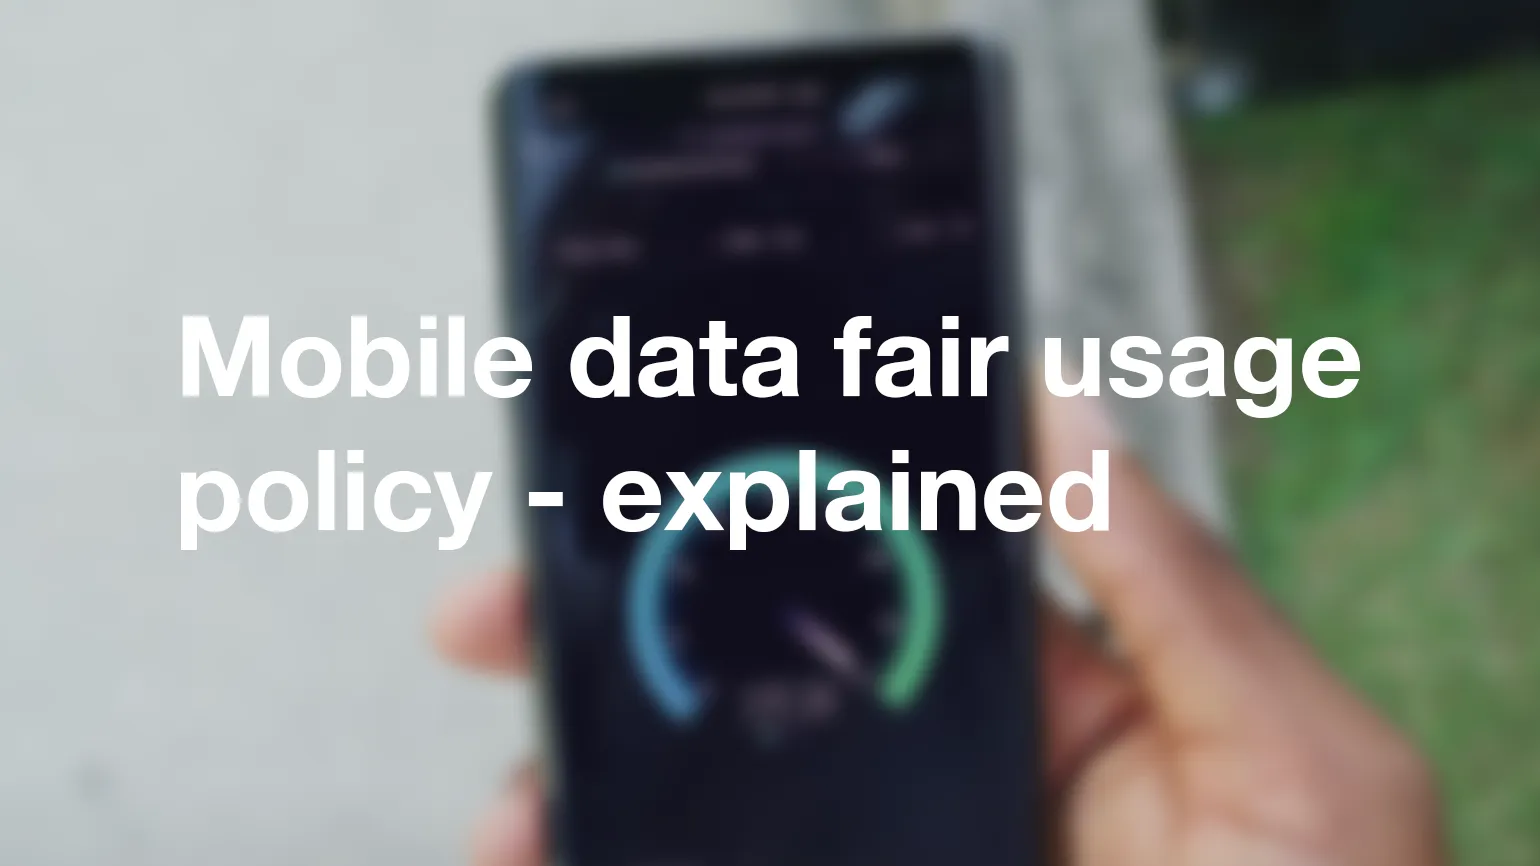 Mobile data fair usage policy - explained